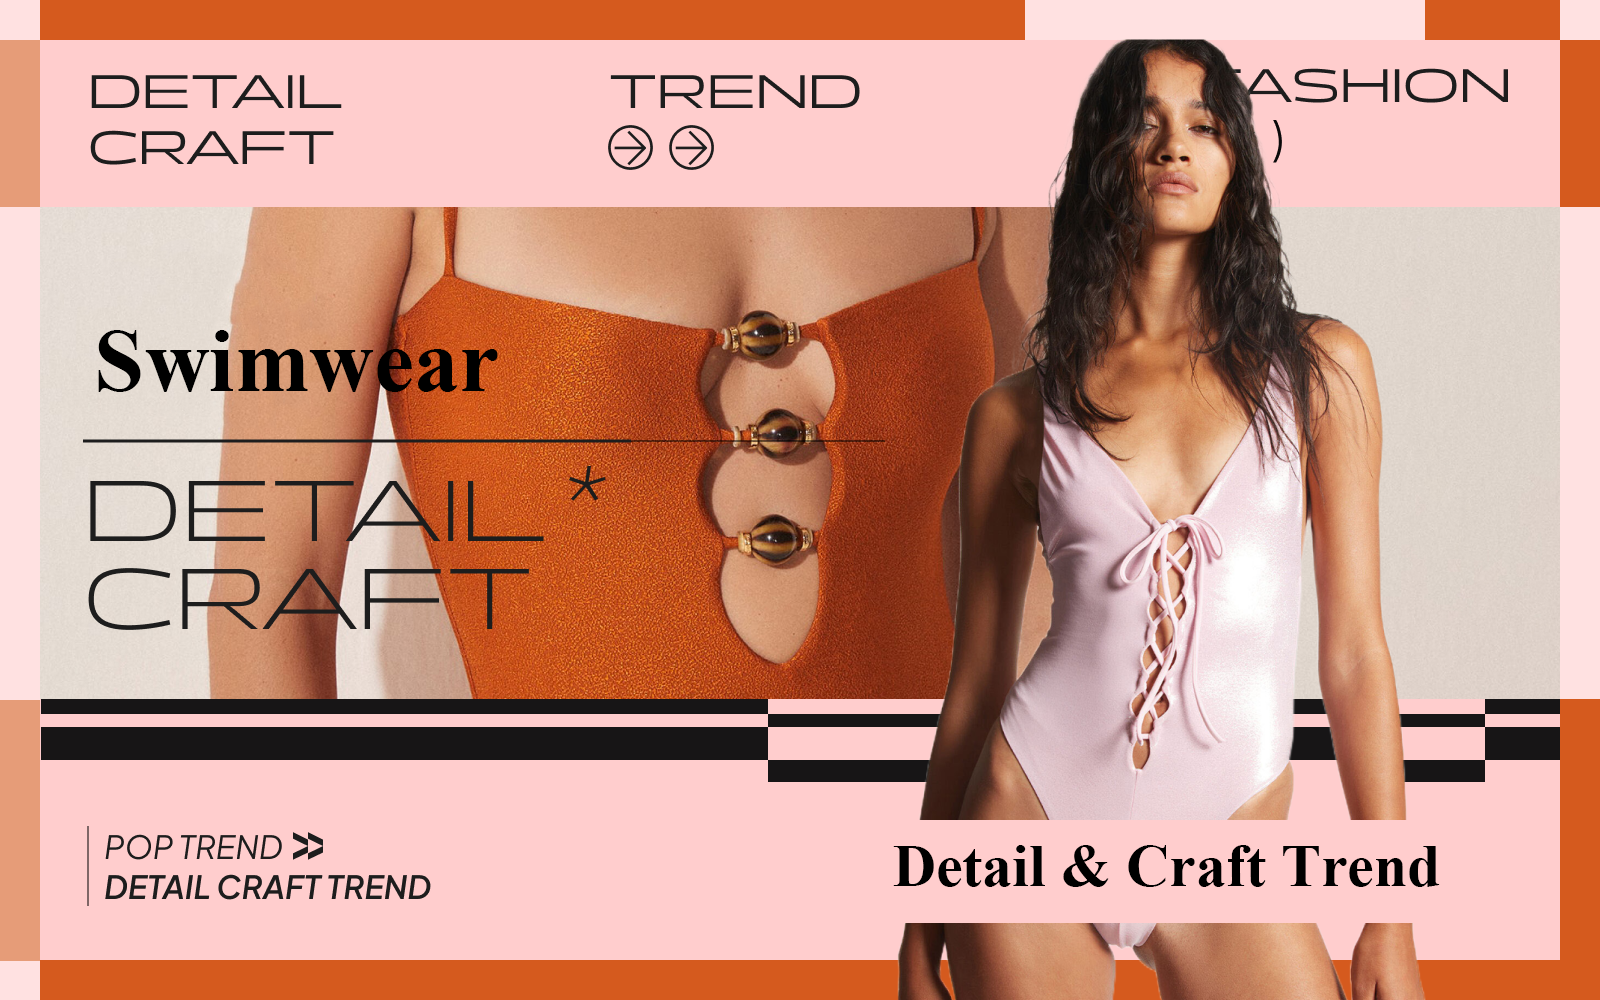 Diverse Texture -- The Detail & Craft Trend for Women's Swimwear